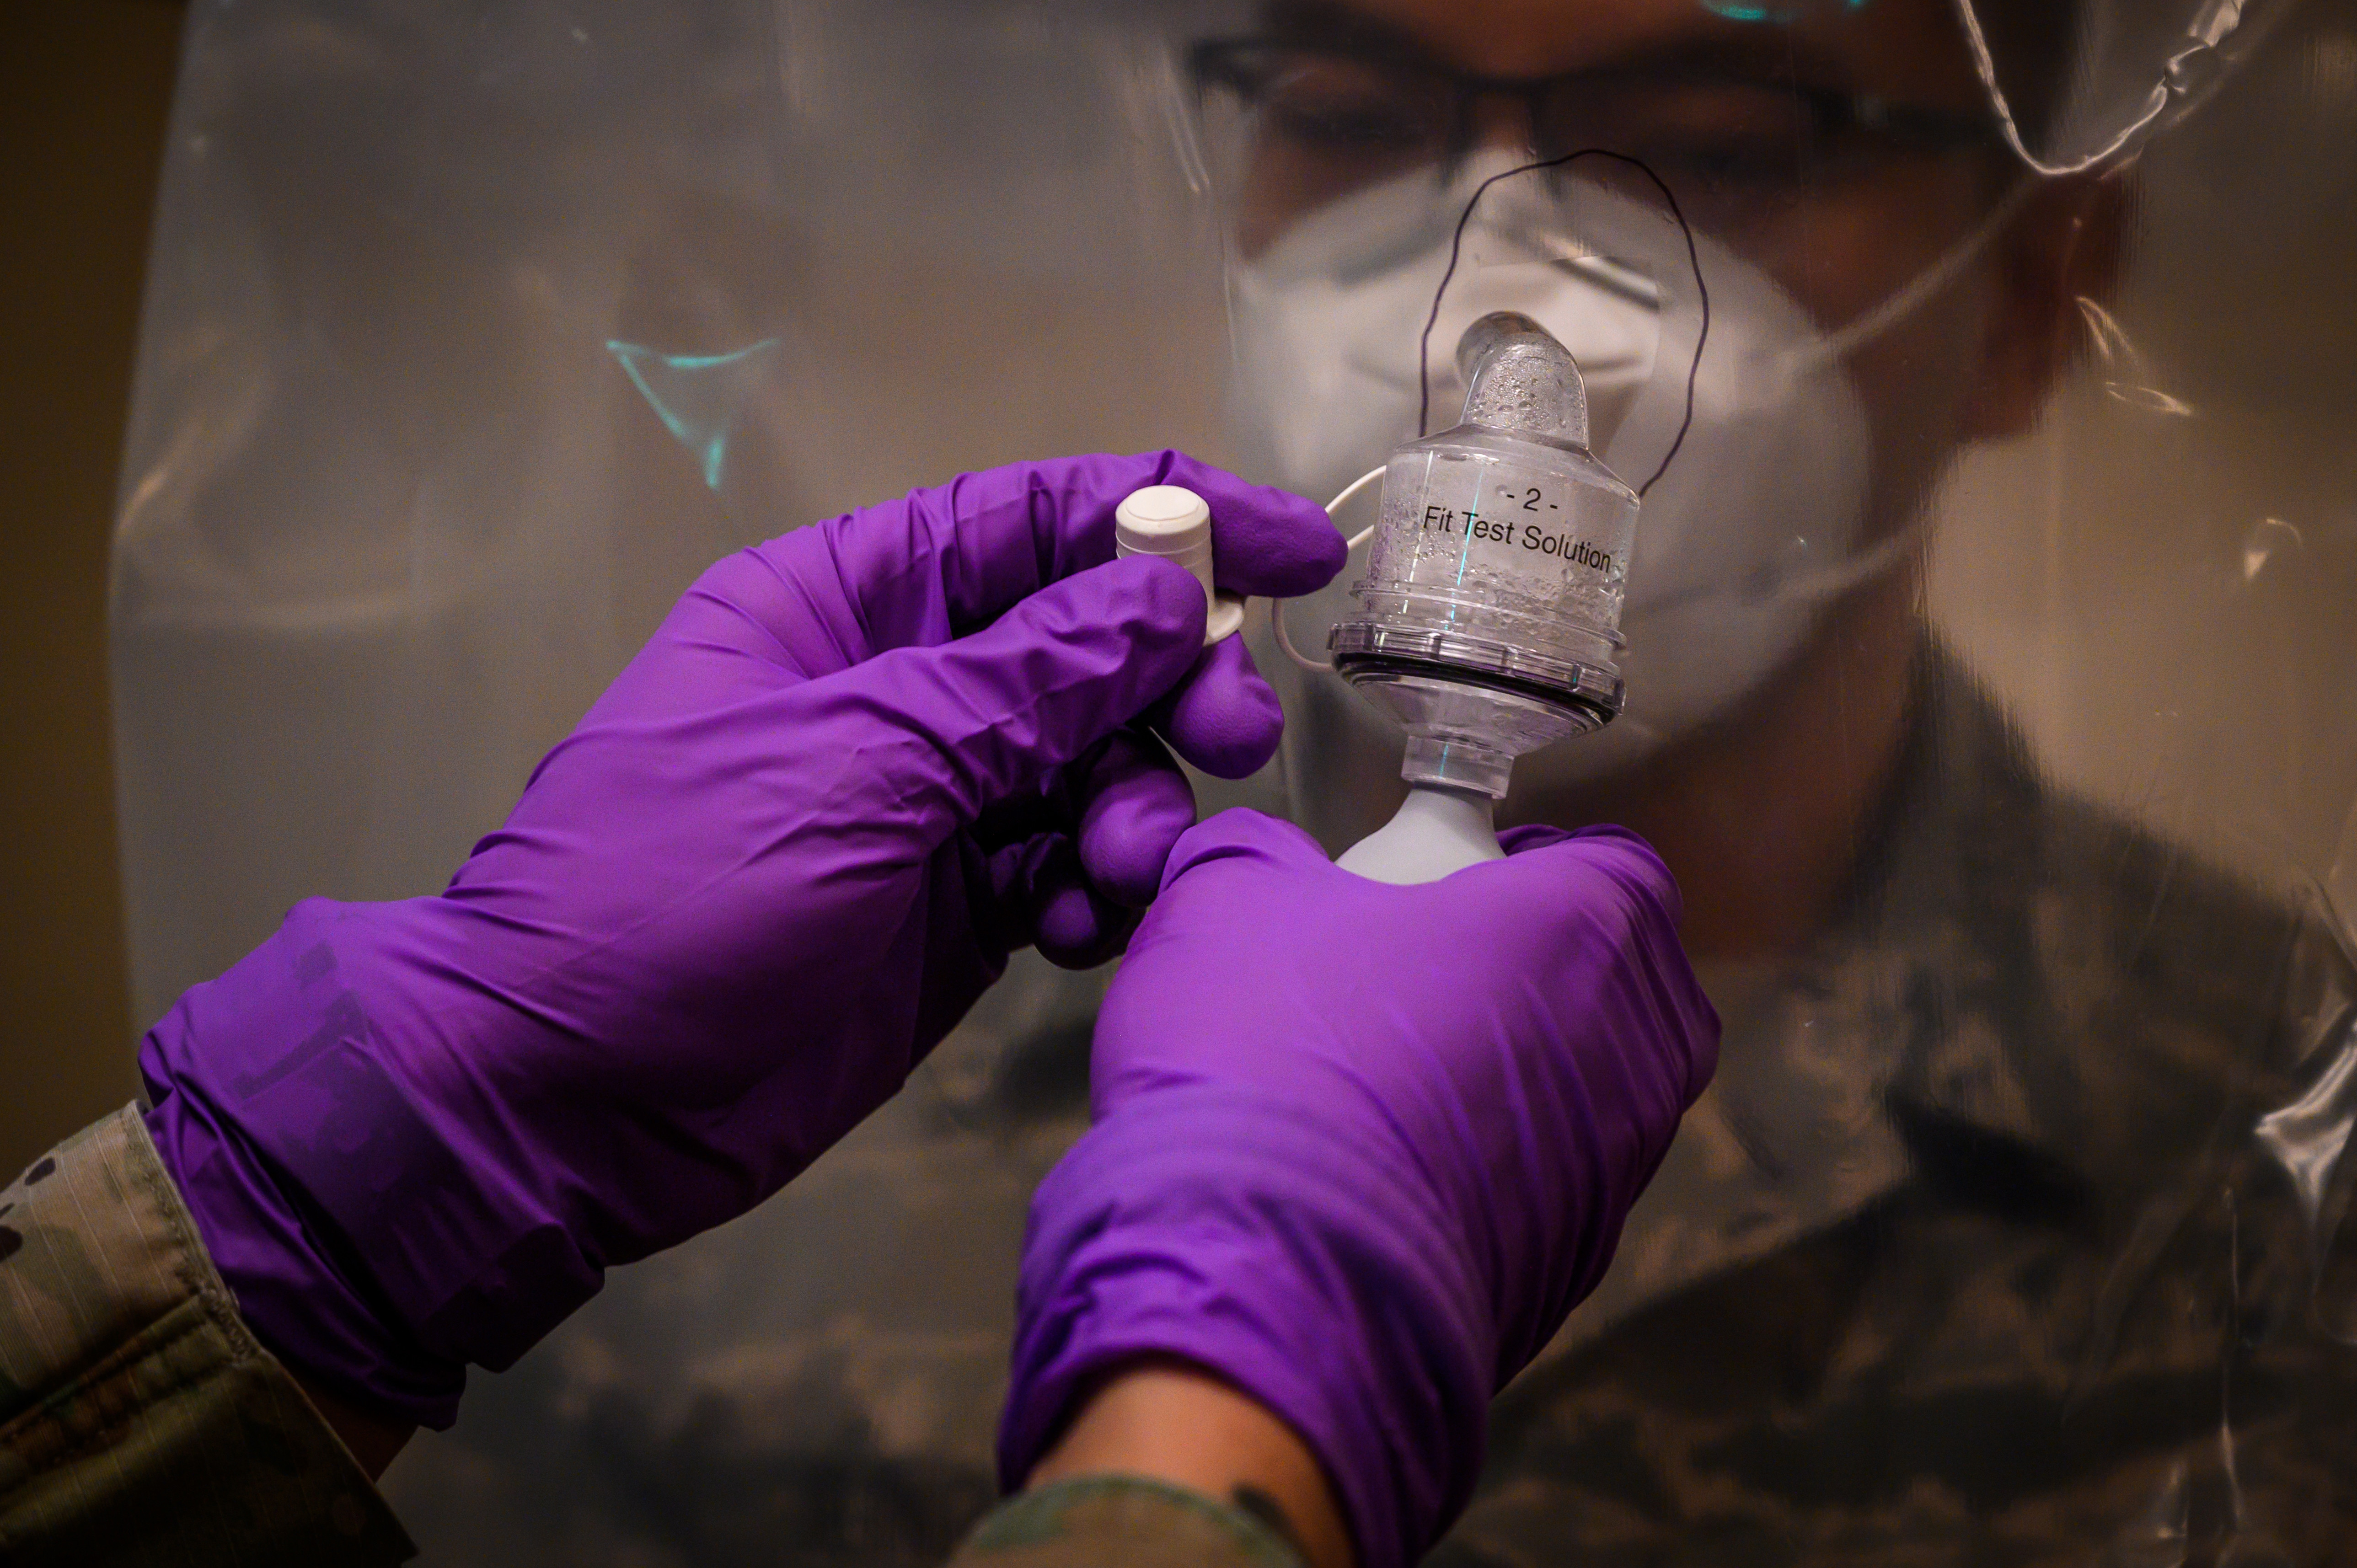 21st-wmd-cst-test-ppe-to-protect-guard-medical-staff-national-guard-guard-news-the